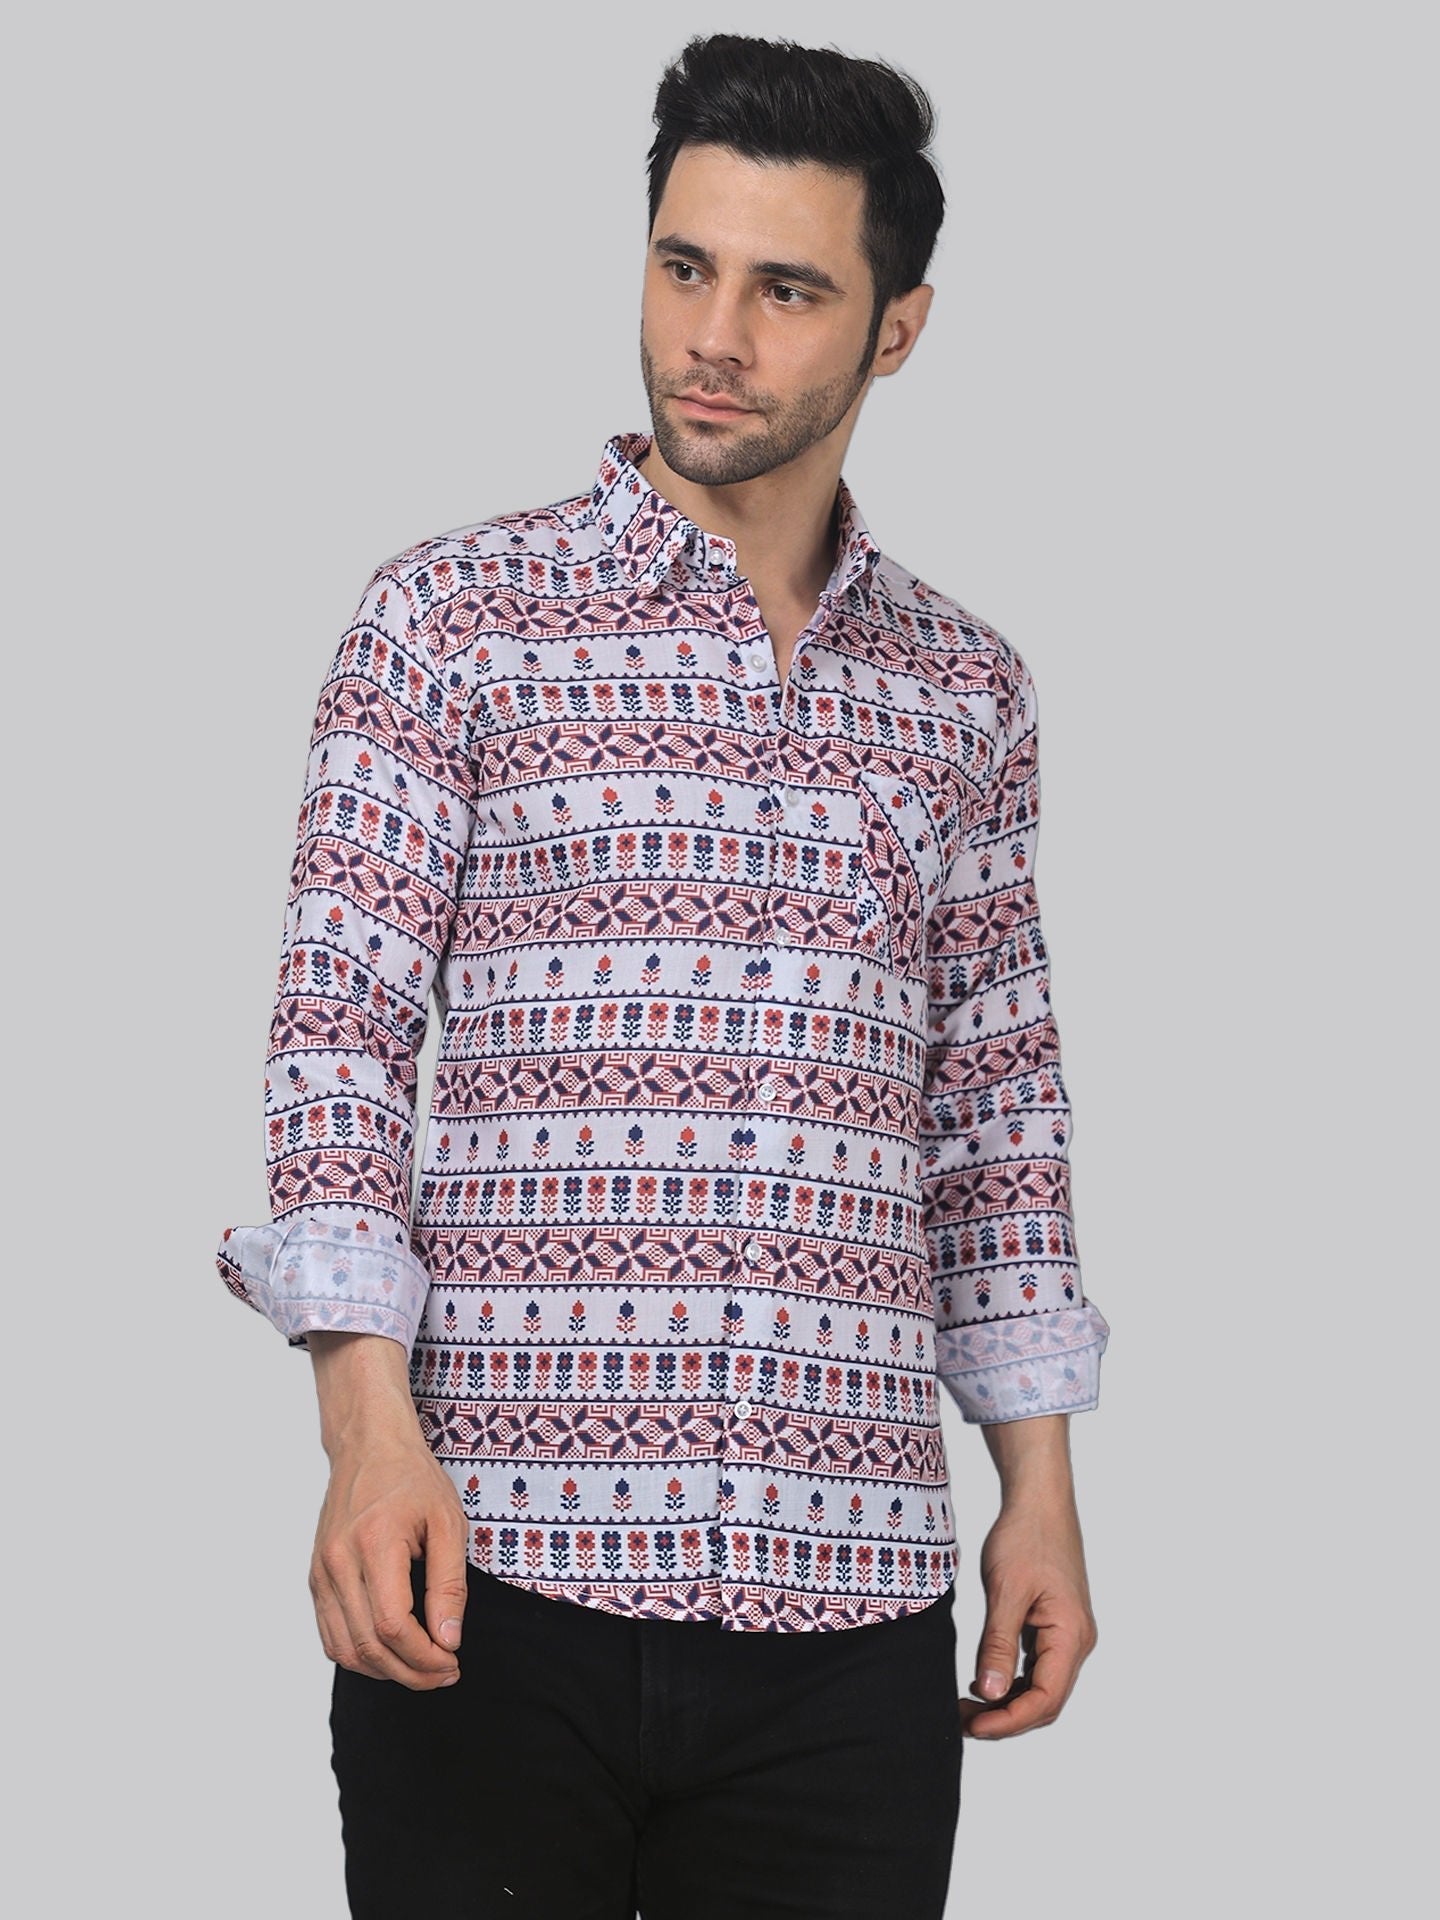 Starry Night Men's Printed Full Sleeve Casual Linen Shirt - TryBuy® USA🇺🇸